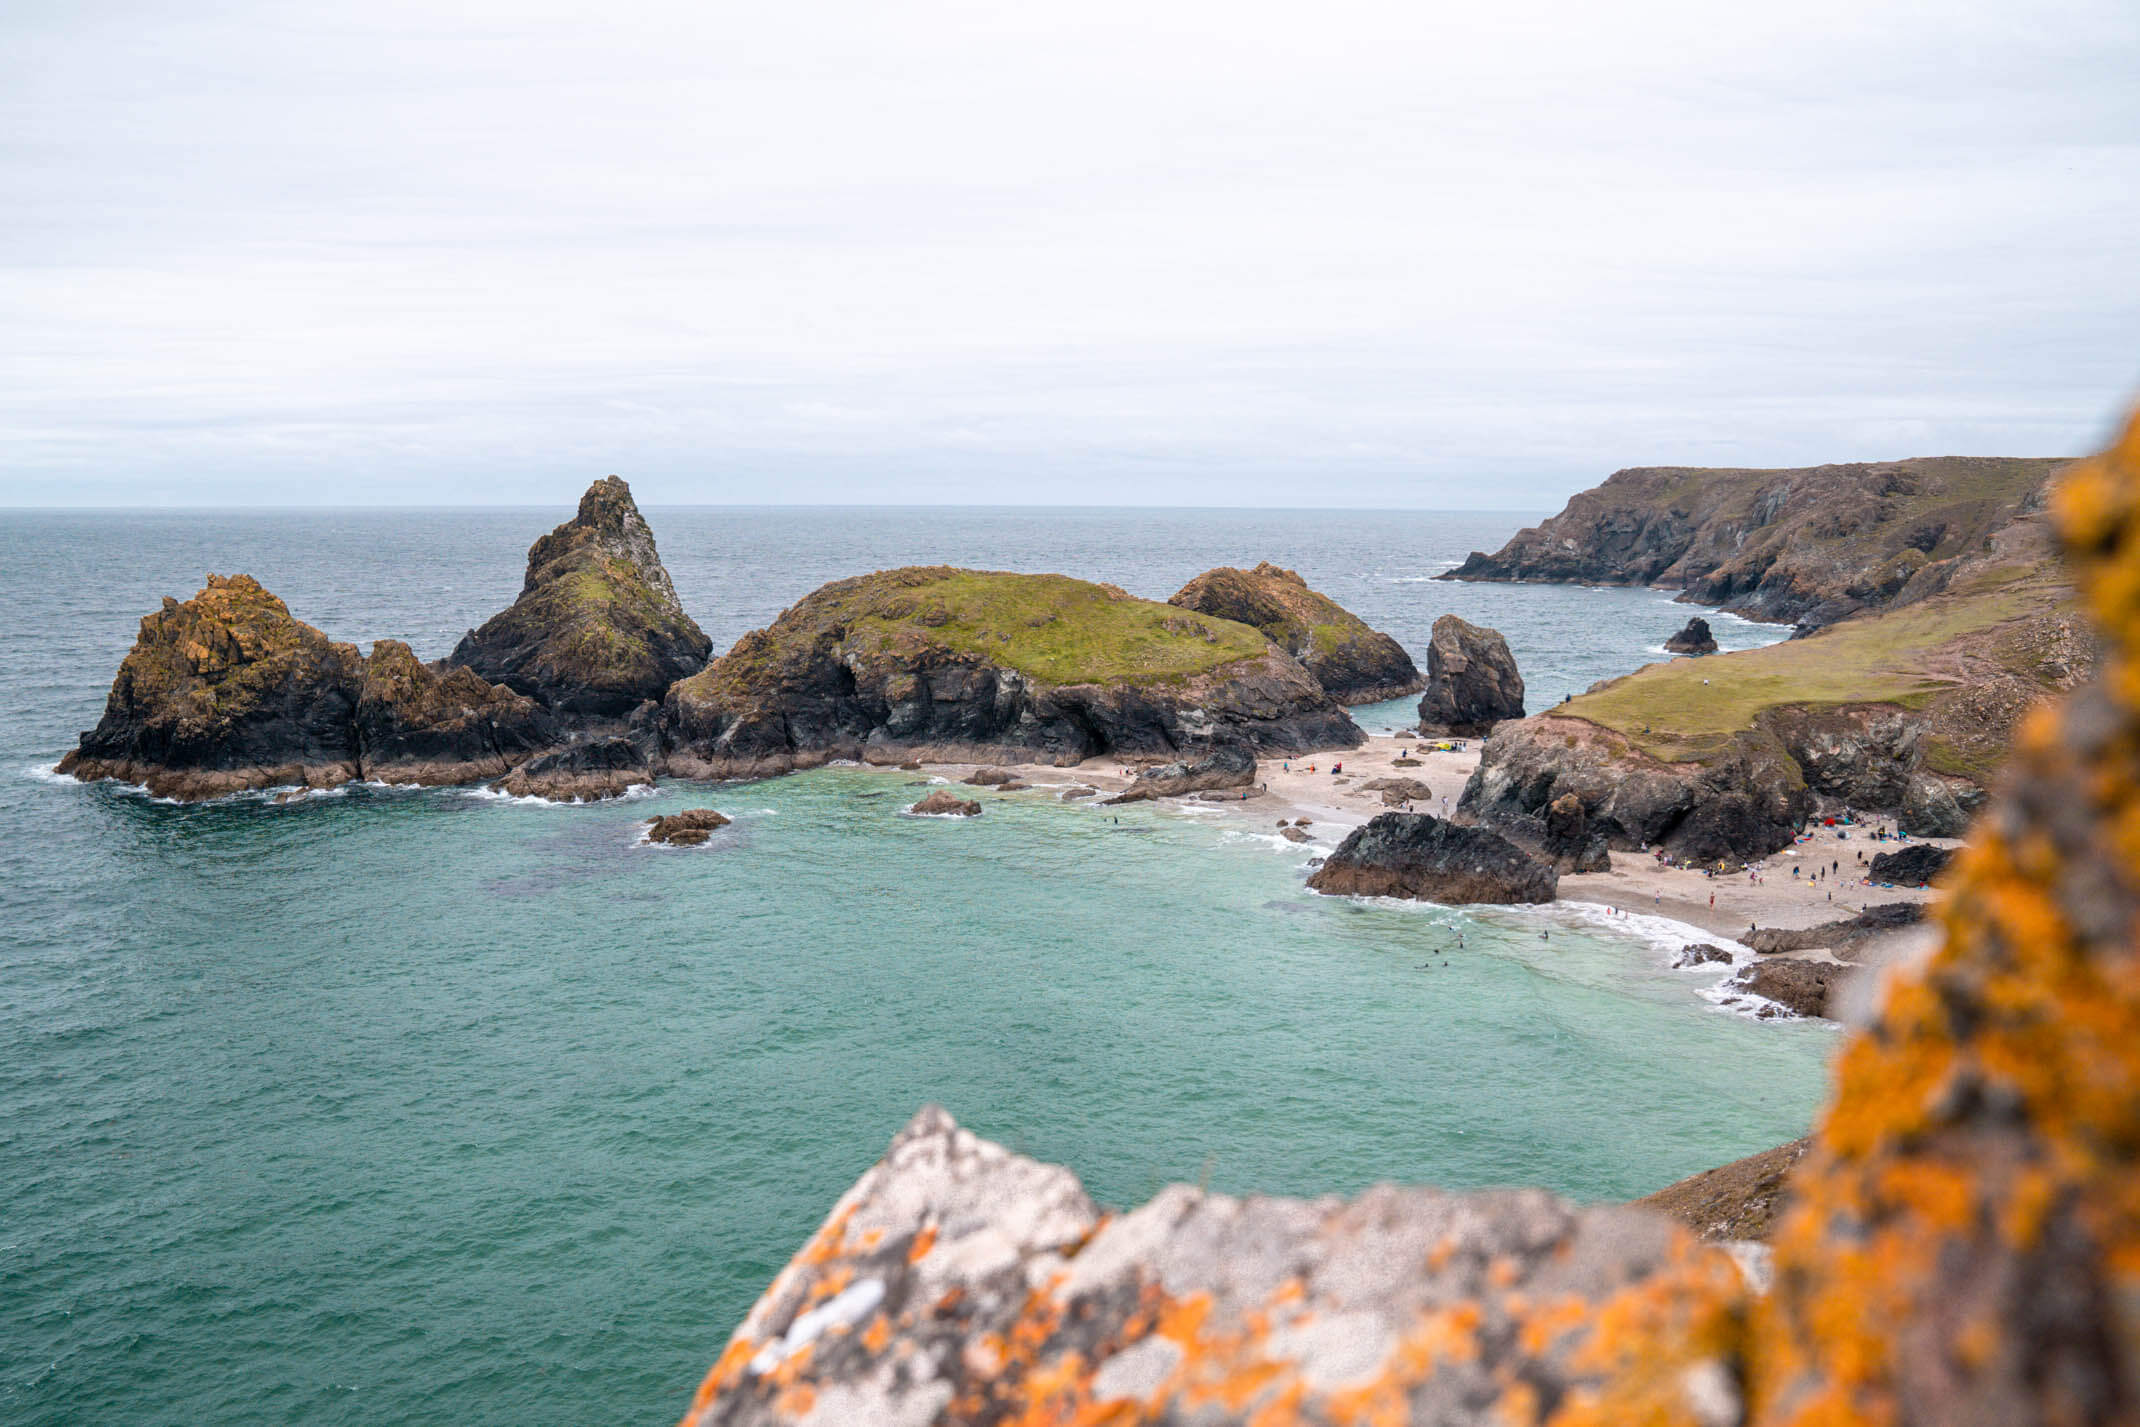 Kynance Cove, A guide to the most beautiful beaches in Cornwall, England